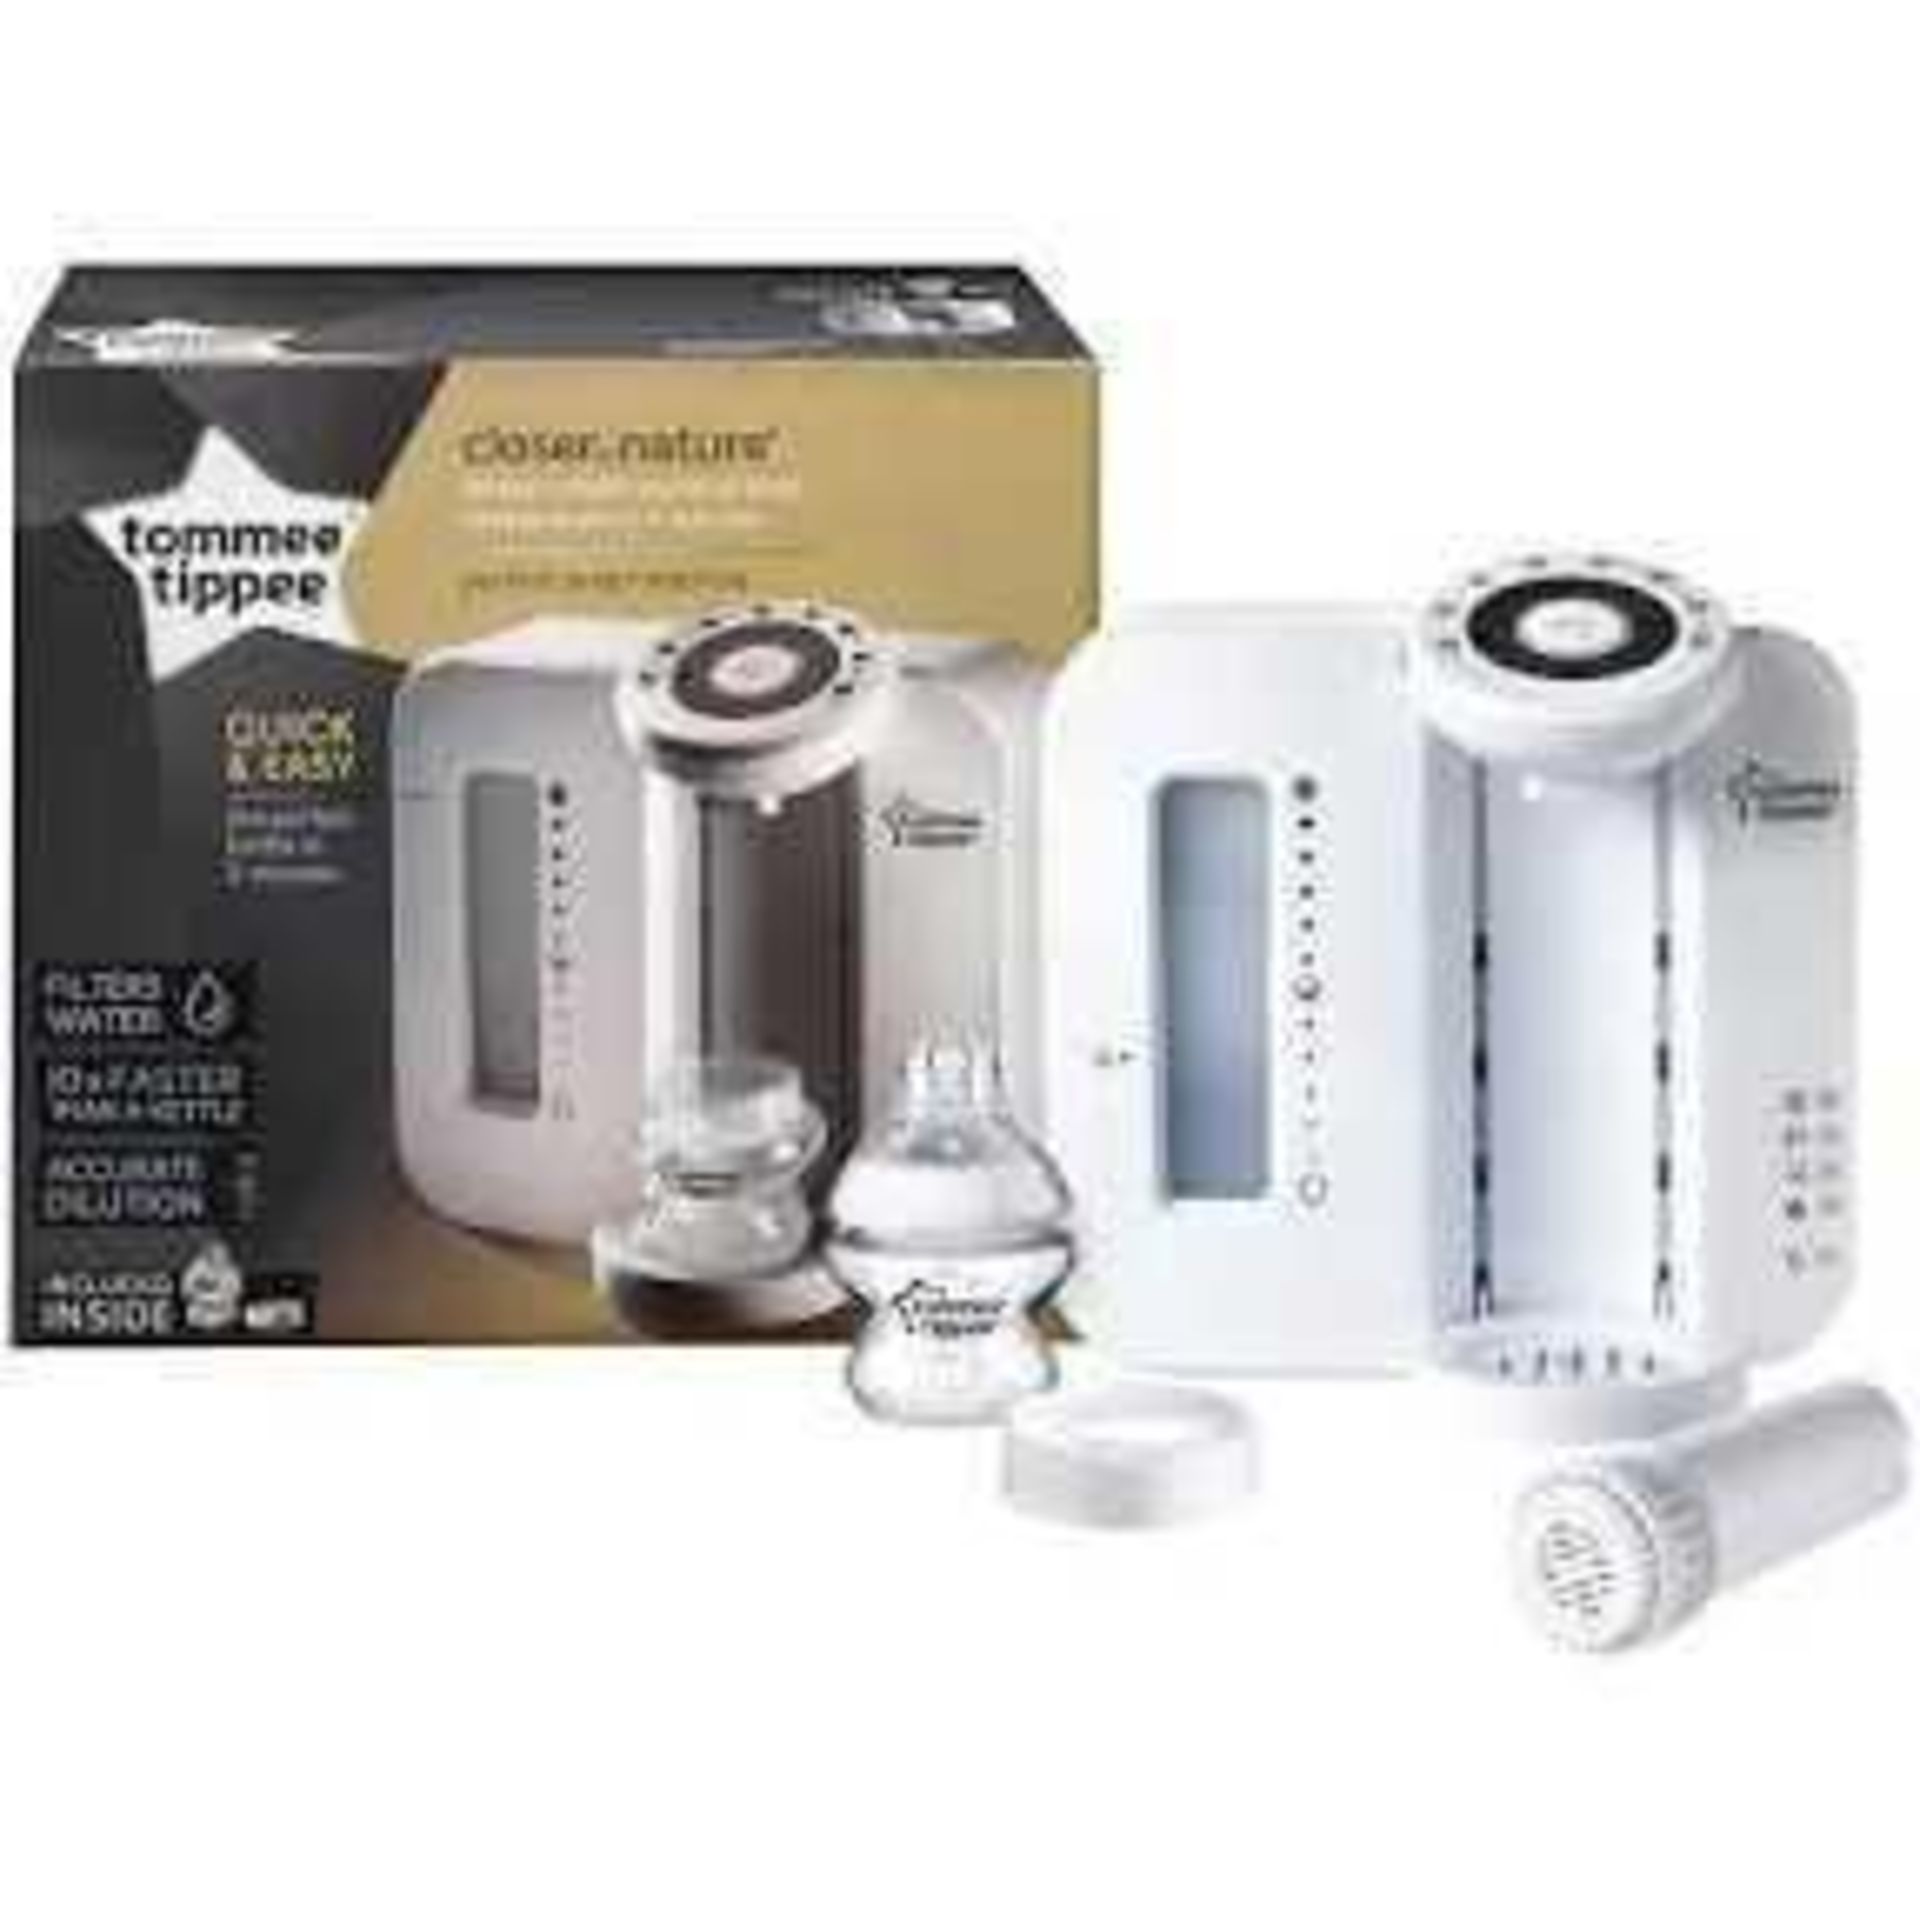 RRP £90-£125 Each Boxed Assorted Tommee Tippee Baby Items - Image 2 of 2